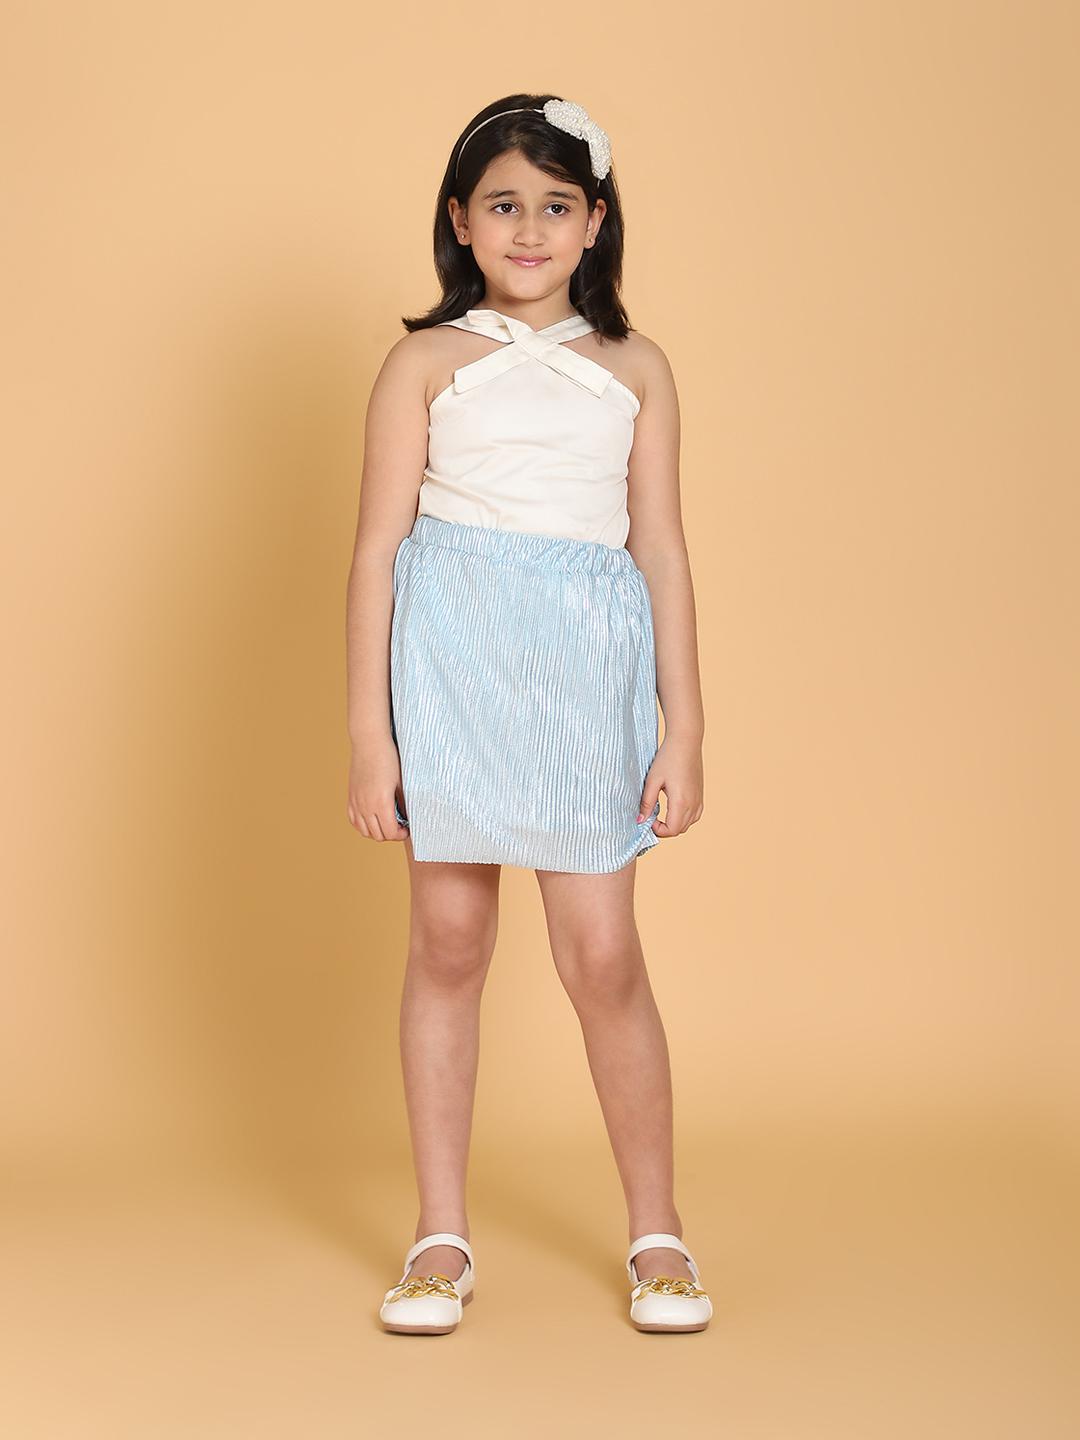 blue-skirt-with-stylish-off-white-top-10510102BL, Kids Clothing, Modal Girl Dress